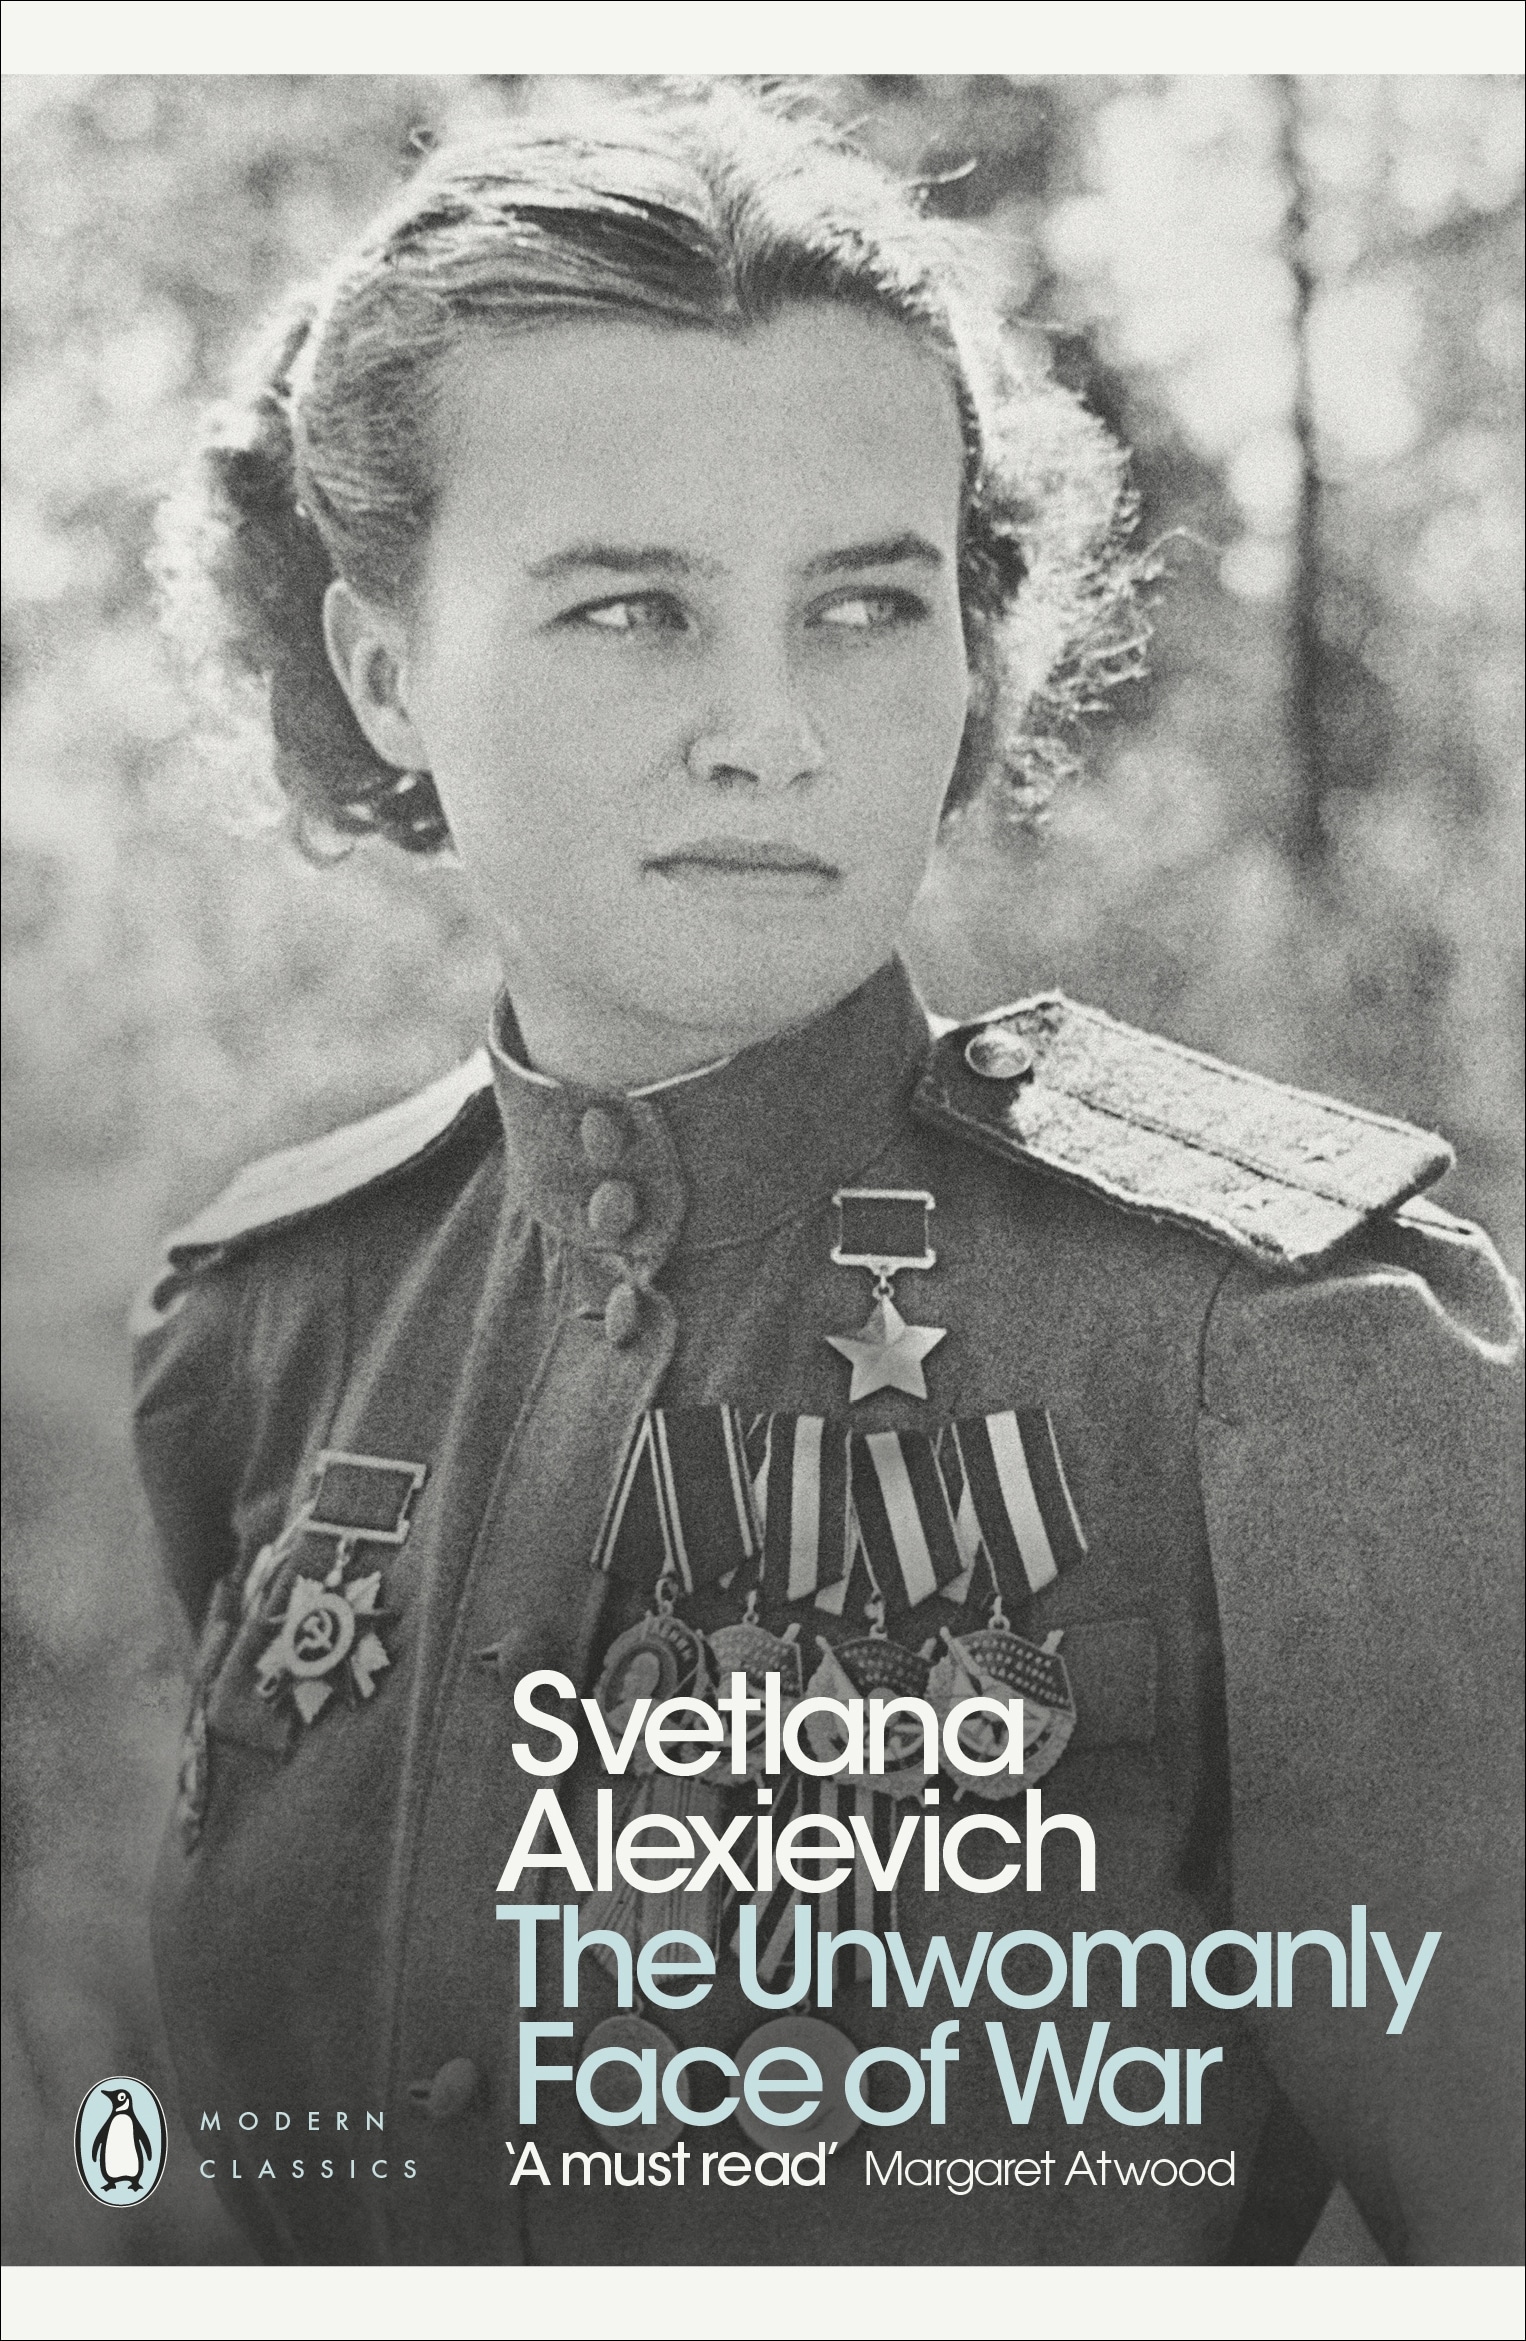 Book “The Unwomanly Face of War” by Svetlana Alexievich — September 6, 2018